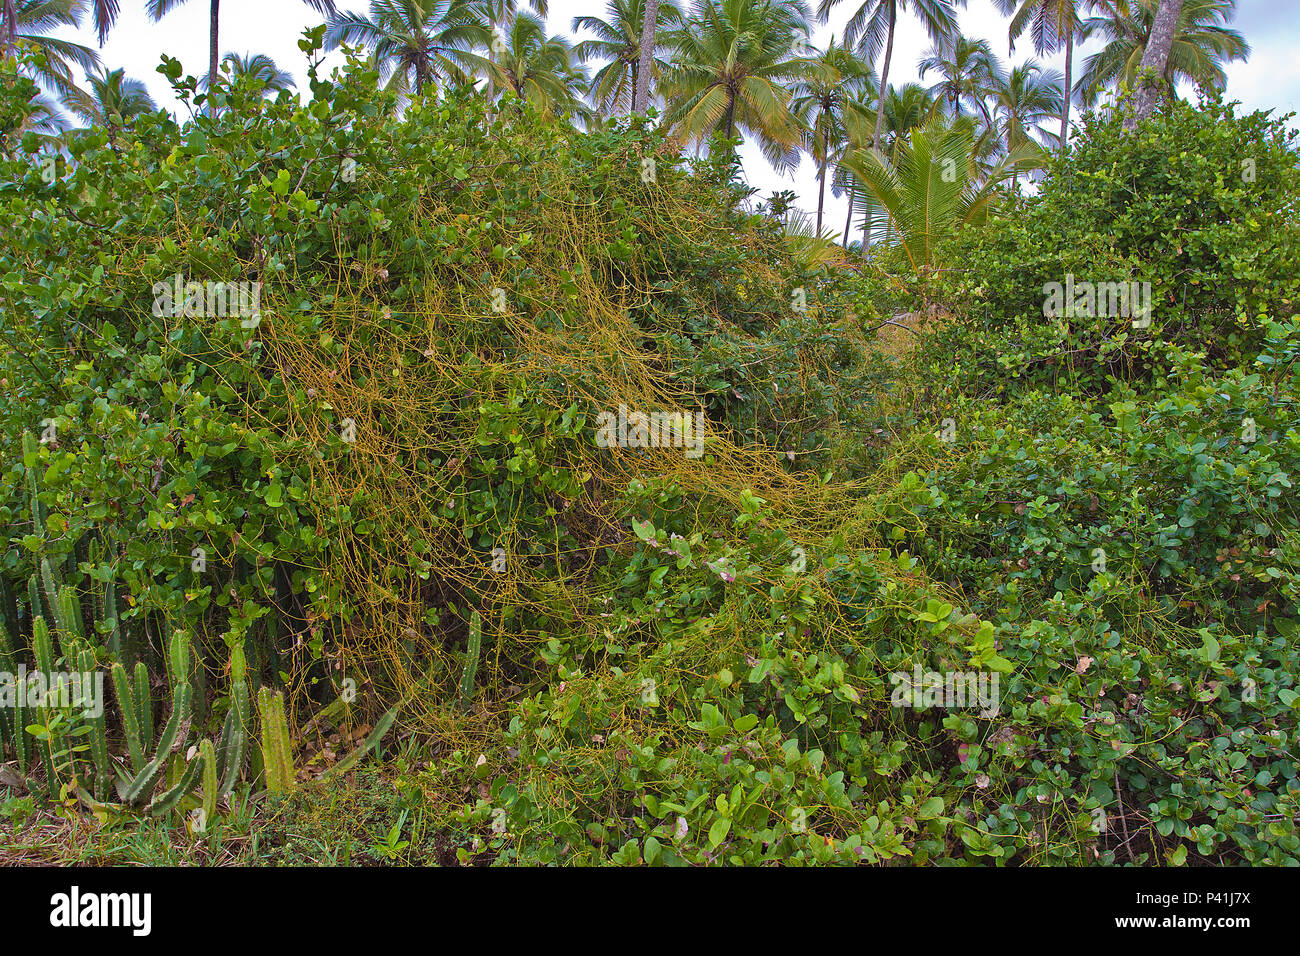 Cipo chumbo hi-res stock photography Alamy images - and